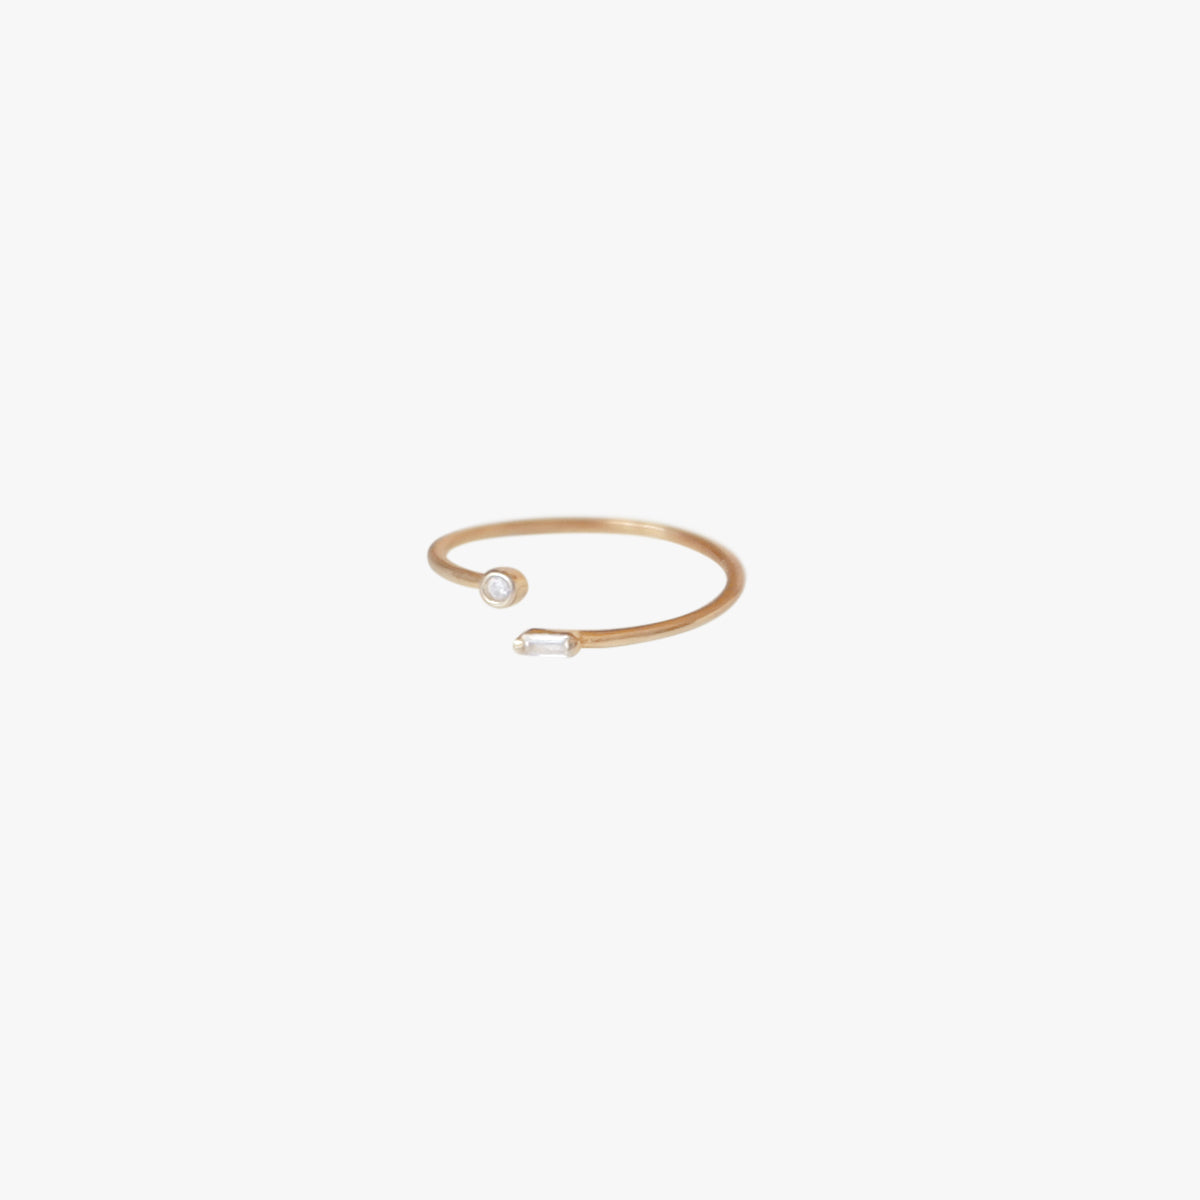 The Tiny Baguette Diamond Ring in Solid Gold